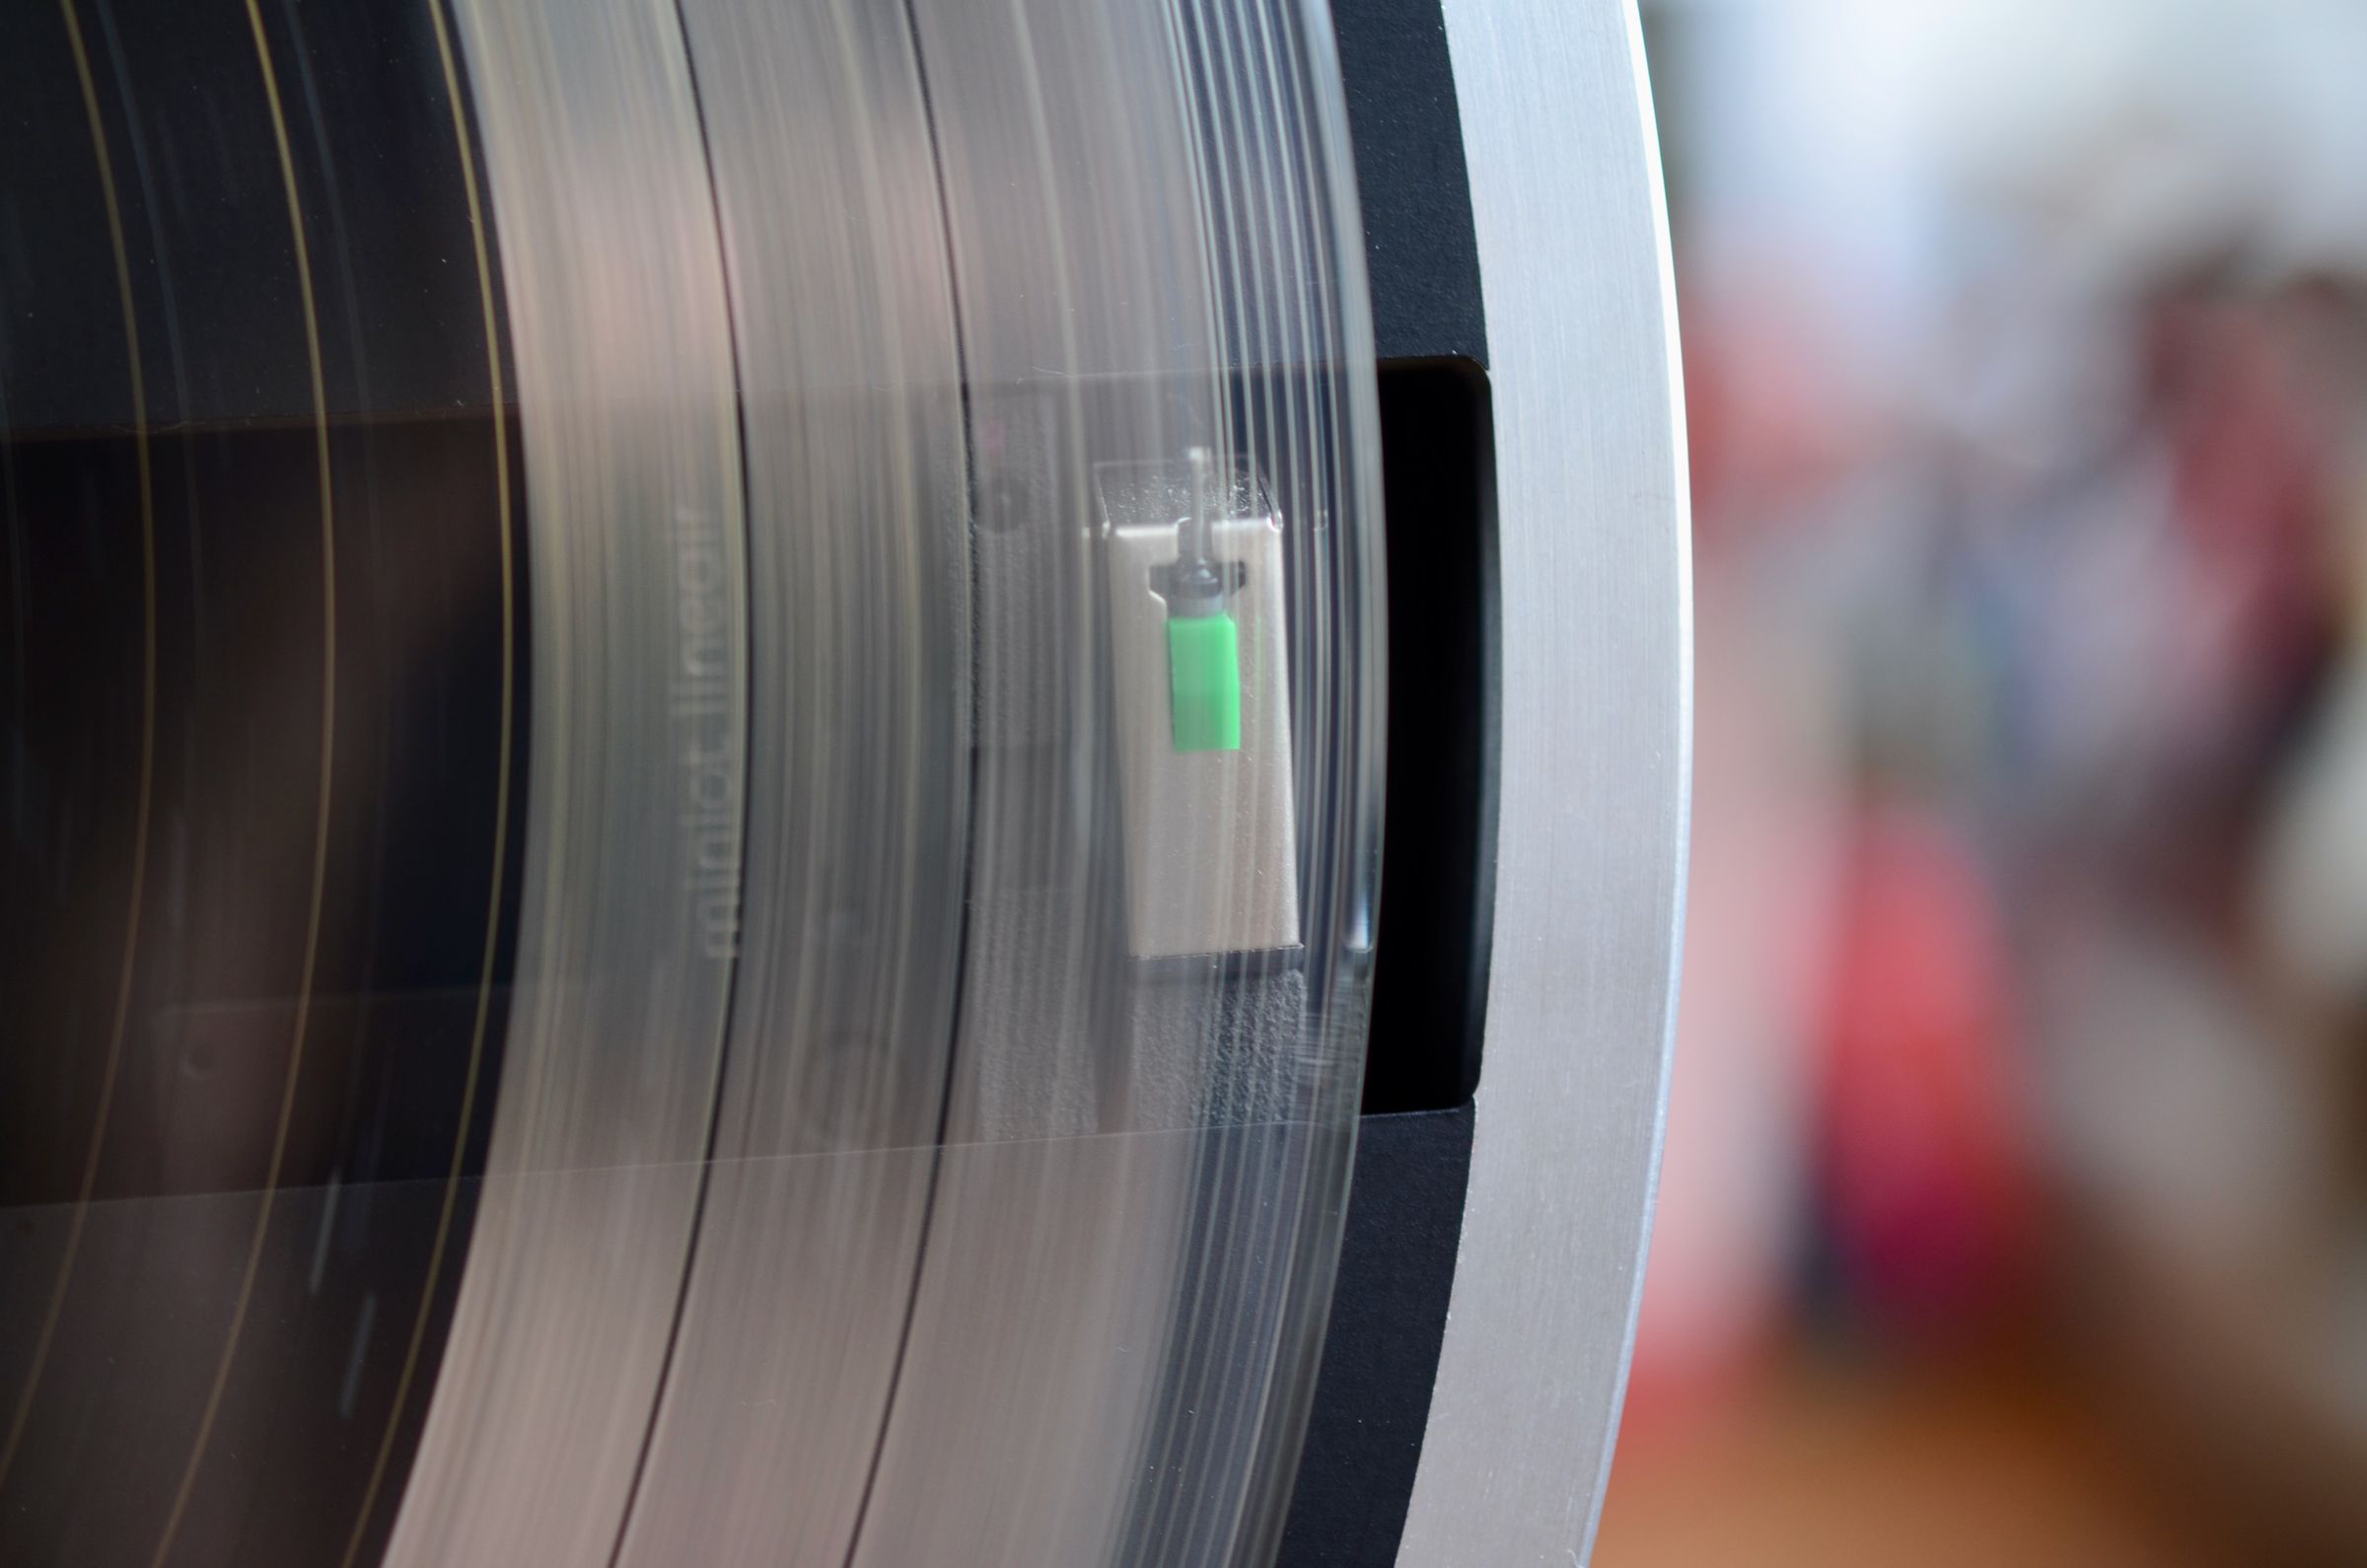 The Wheel 2 spins the record counter-clockwise and plays the bottom of the record.